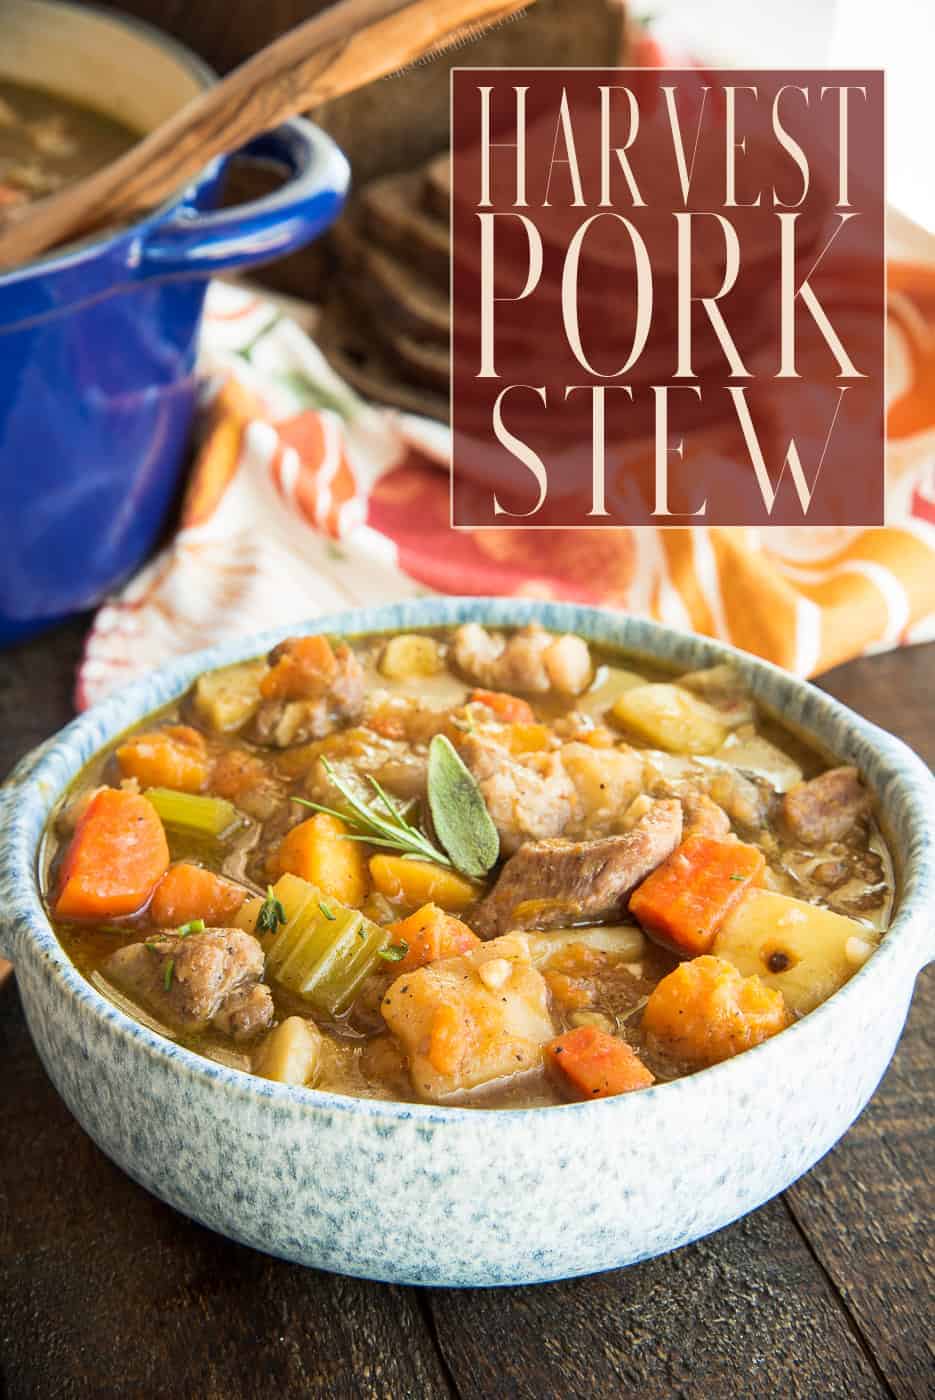 This comforting Harvest Pork Stew recipe has a rich broth with sweet and savory elements from hearty tubers like potatoes, sweet potato, boniato, and butternut squash. A deep stout beer adds a malty element to the stew that can't be beat. Freezer and make-ahead friendly as well. #porkstew #fallrecipe #stewrecipe #butternutsquashrecipes #sweetpotatorecipes #boniatorecipes #souprecipes #fallstew #maincourse #maindish #entree #warmweatherrecipe #dutchovenrecipes via @ediblesense